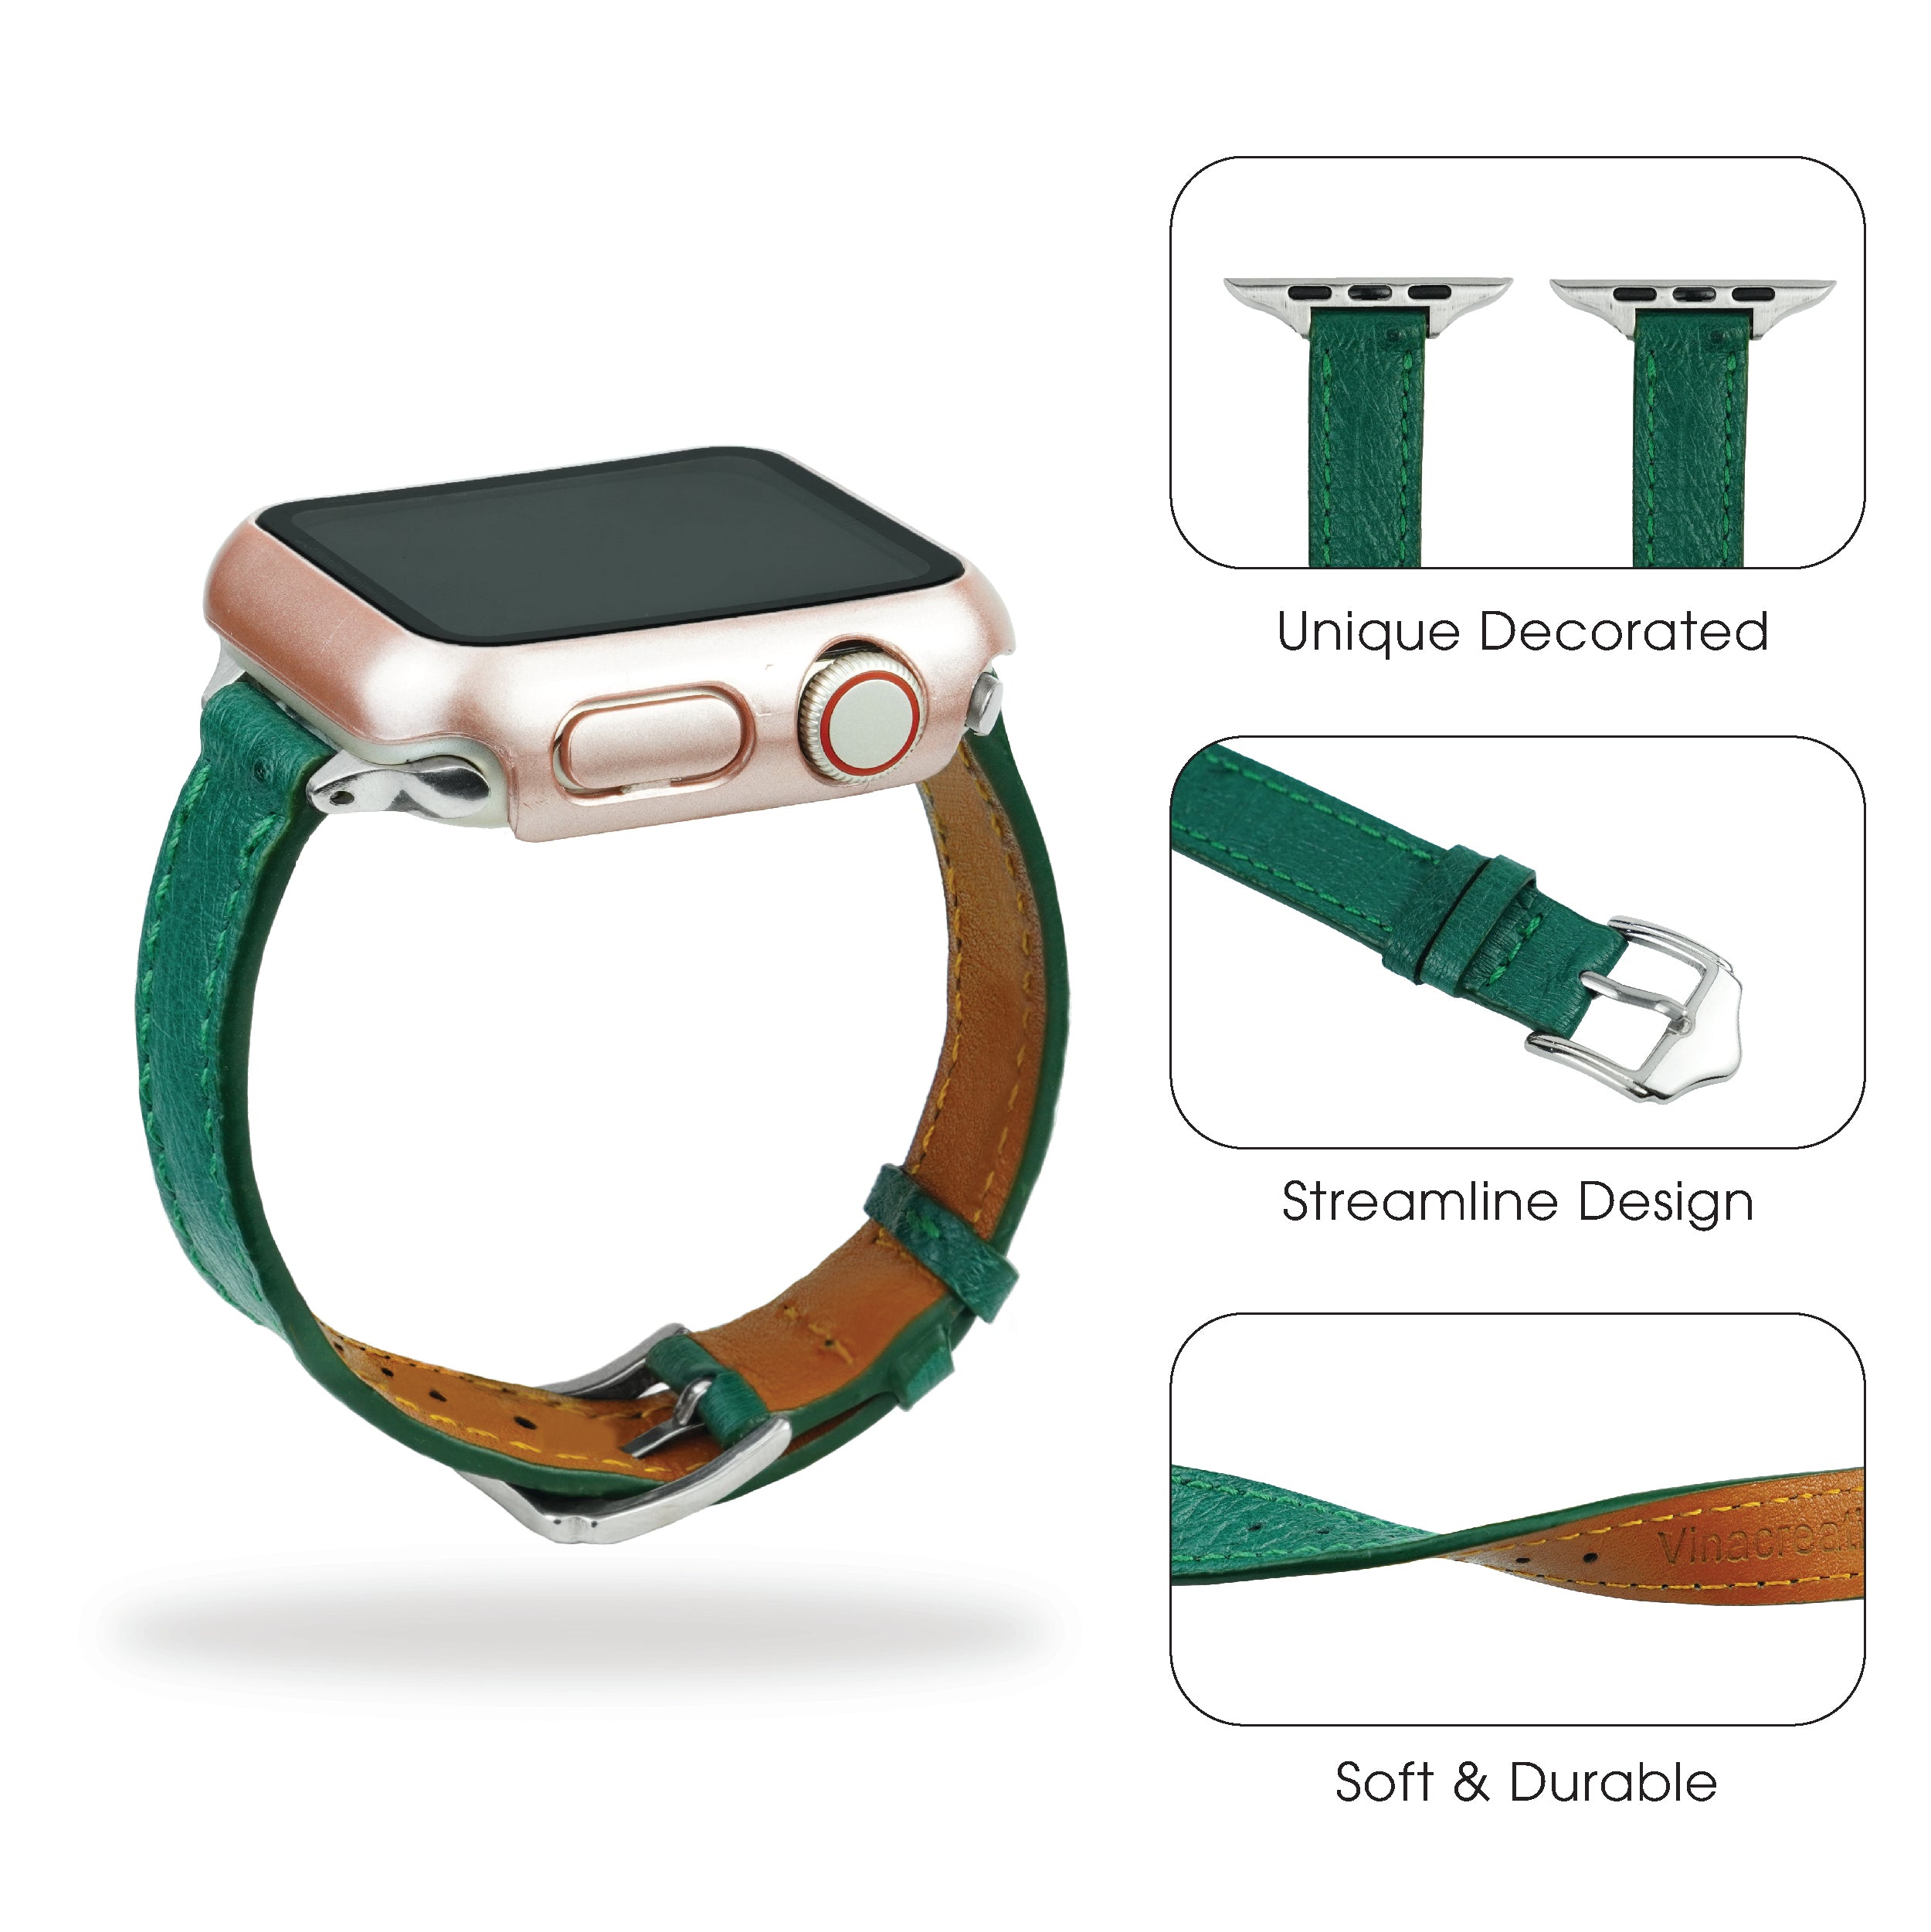 Green Flat Ostrich Leather Band Compatible Apple Watch Iwatch 38mm Screen Protector Case Silver Adapter Replacement Strap For Smartwatch Series 1 2 3 Leather Handmade AW-188S-W-38MM